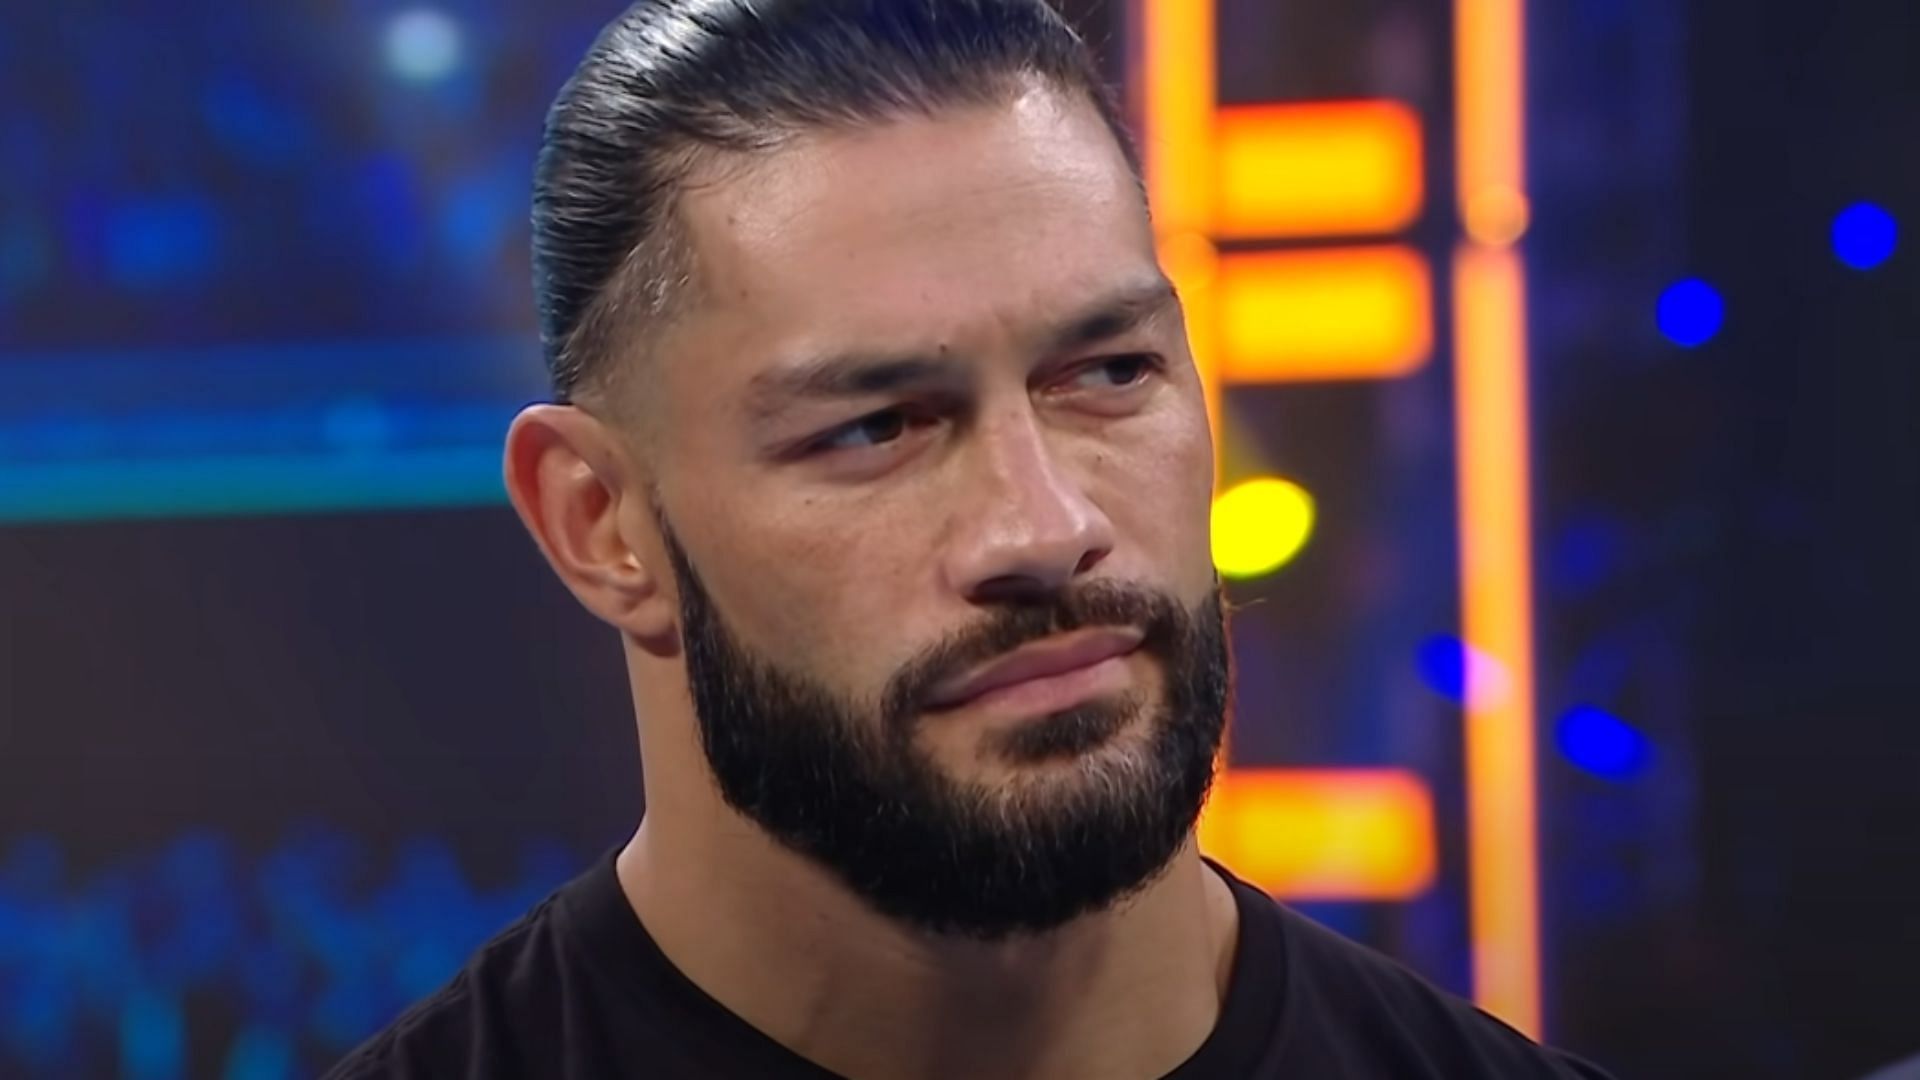 Roman Reigns has been one of WWE